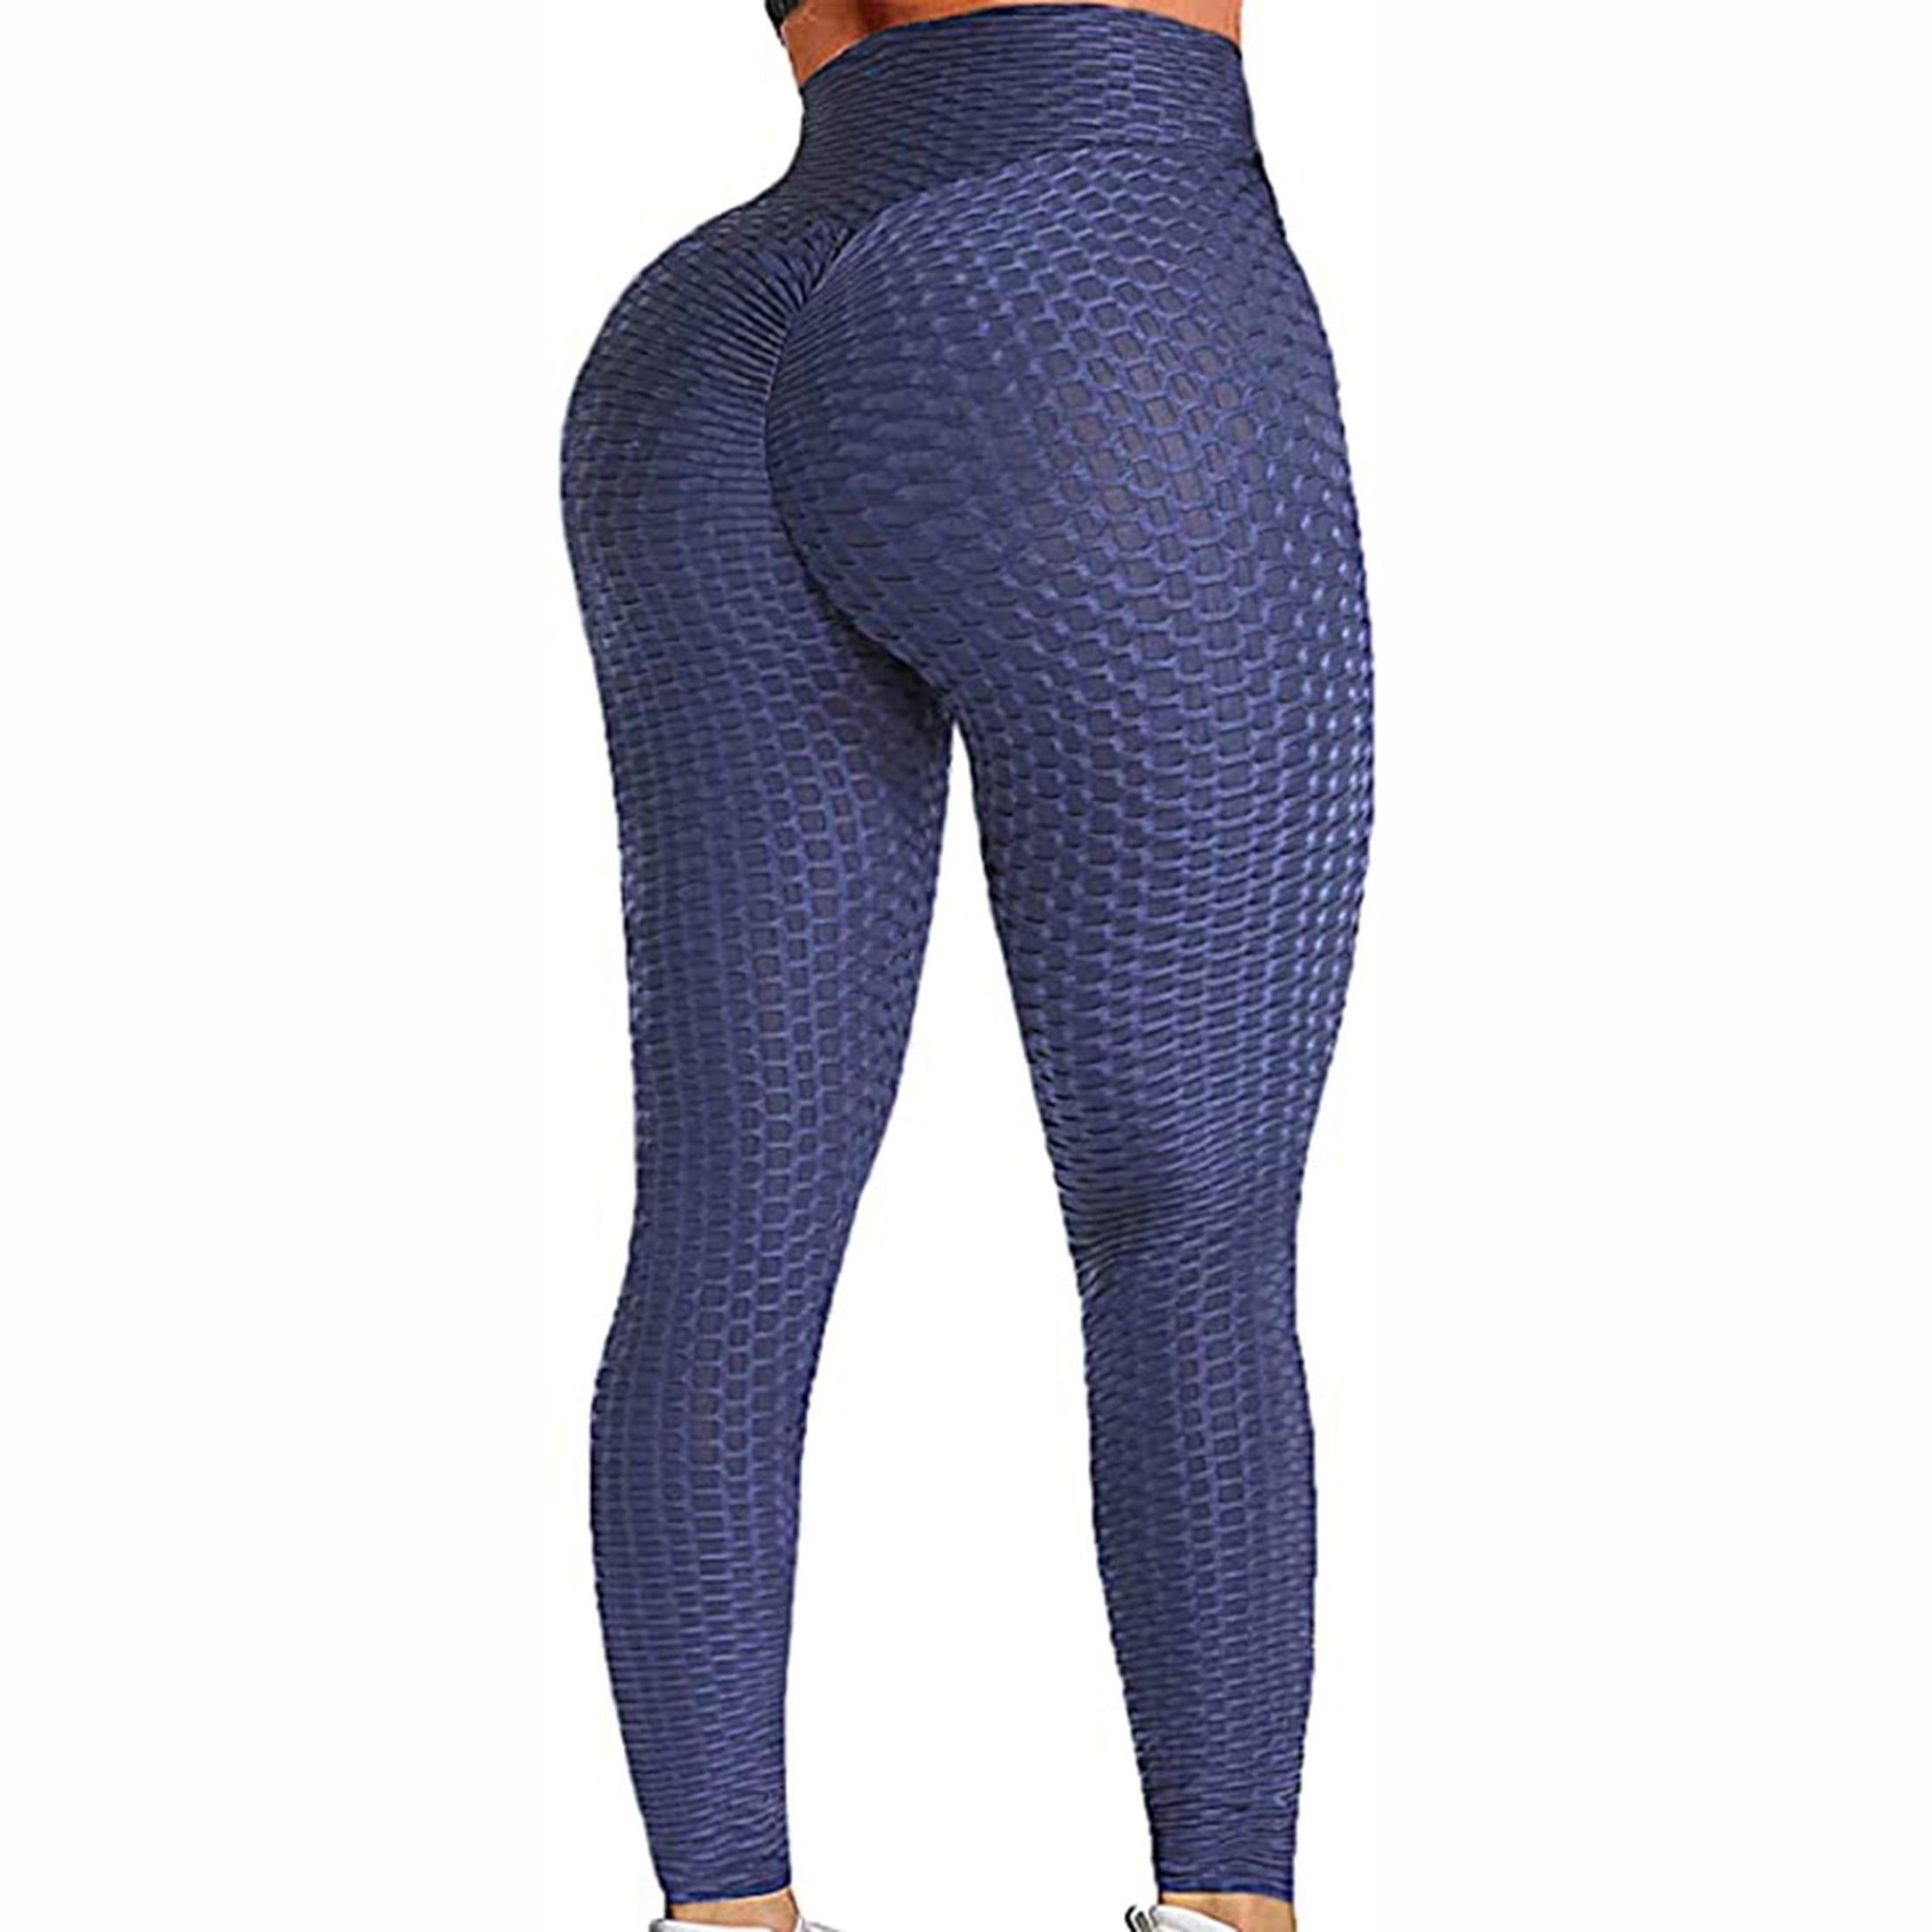 Womens High Waisted Seamless Leggings Tummy Control Workout Gym Athletic  Yoga Pants Butt Lift Compression Skinny Tights price in UAE,  UAE